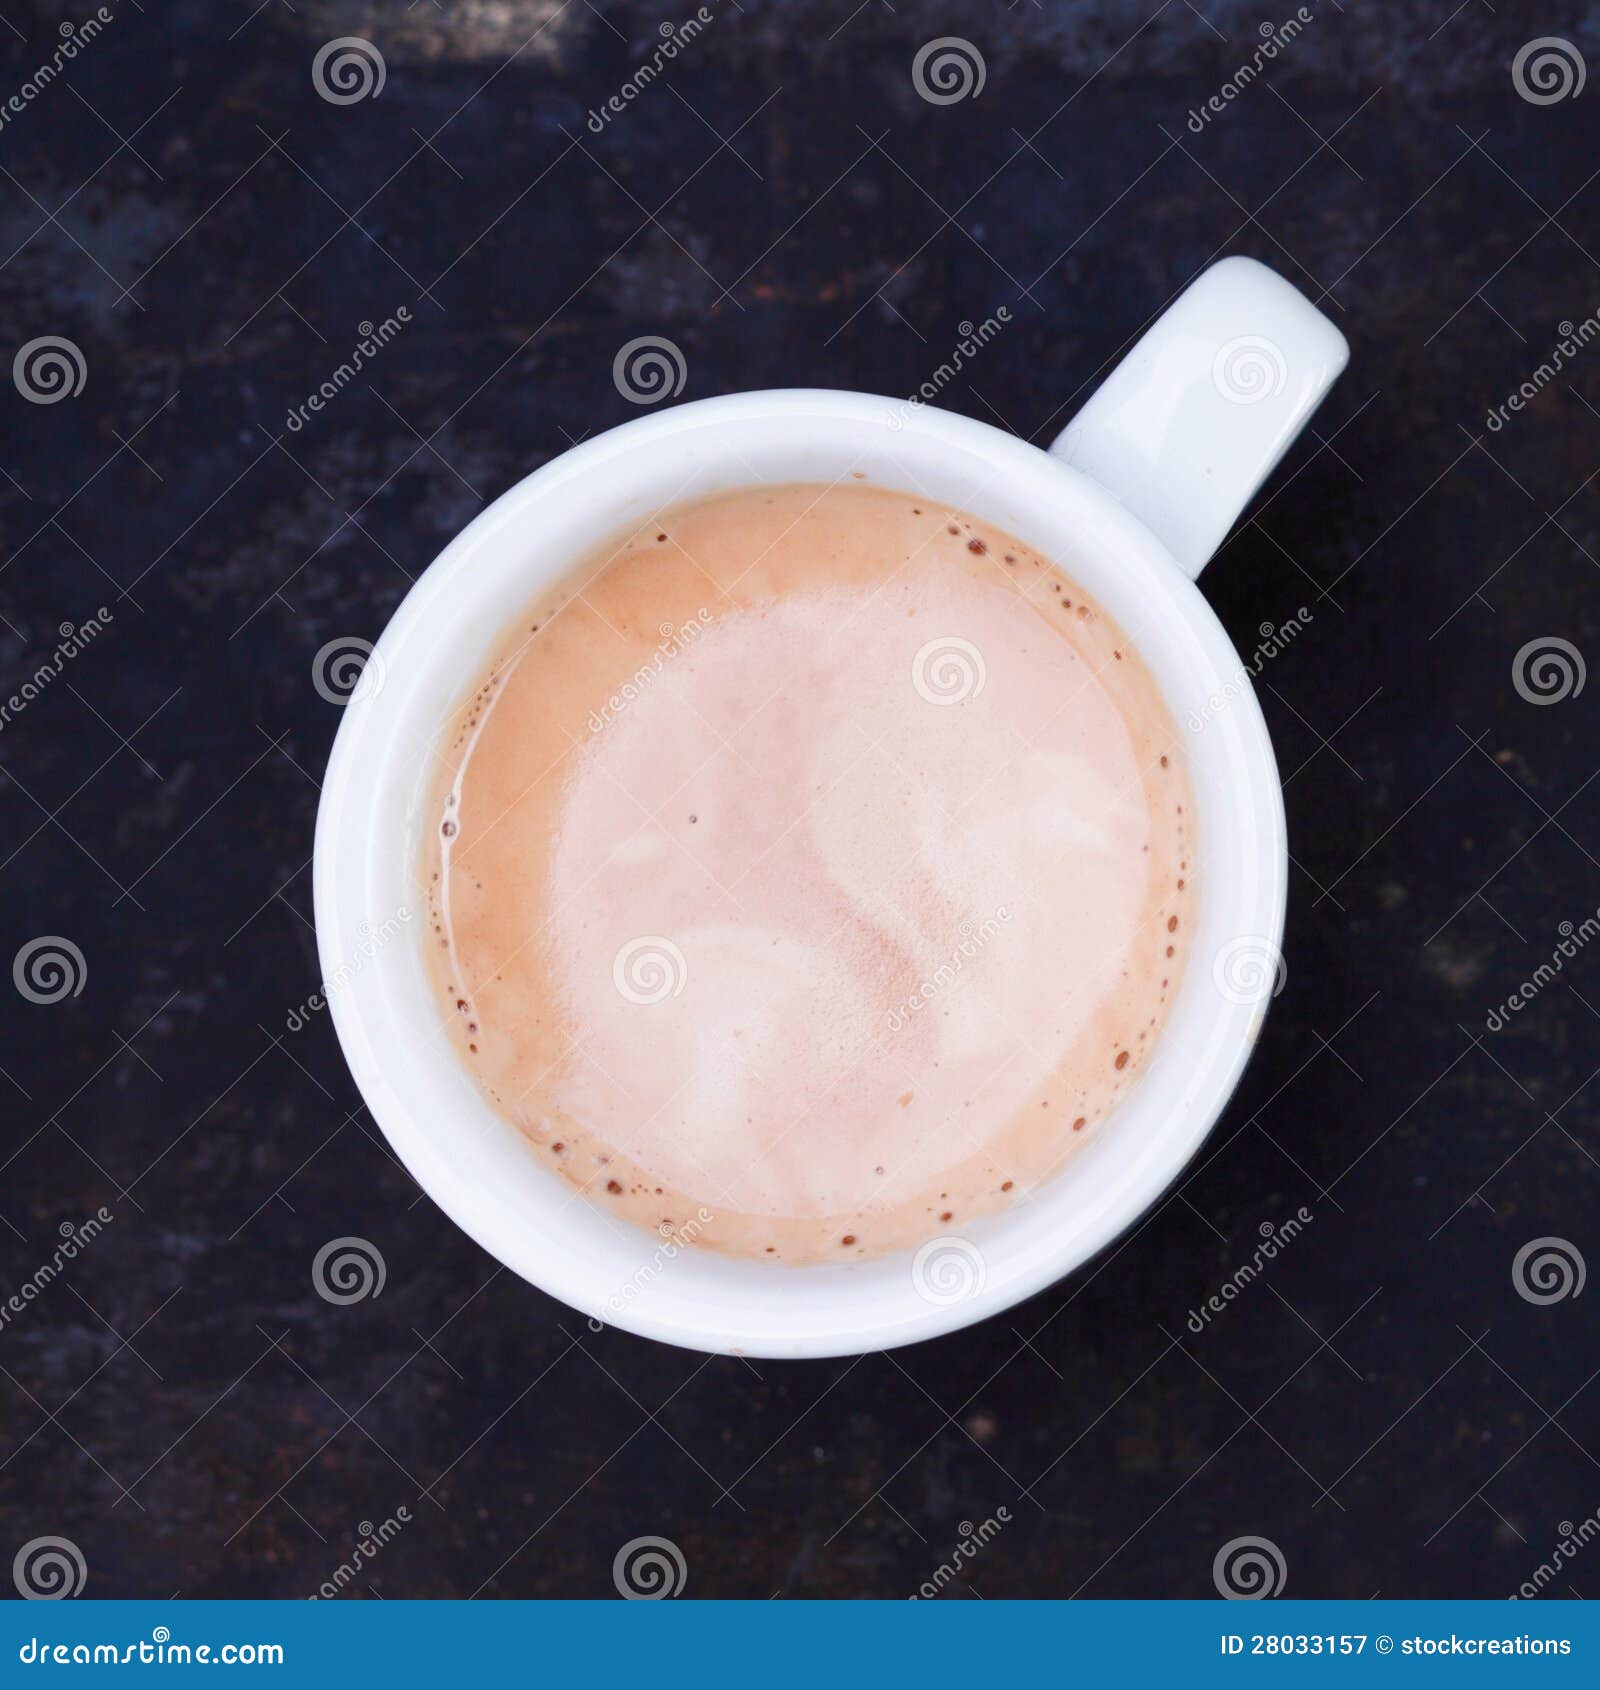 hot frothy cup of cappuccino or cafe au lait